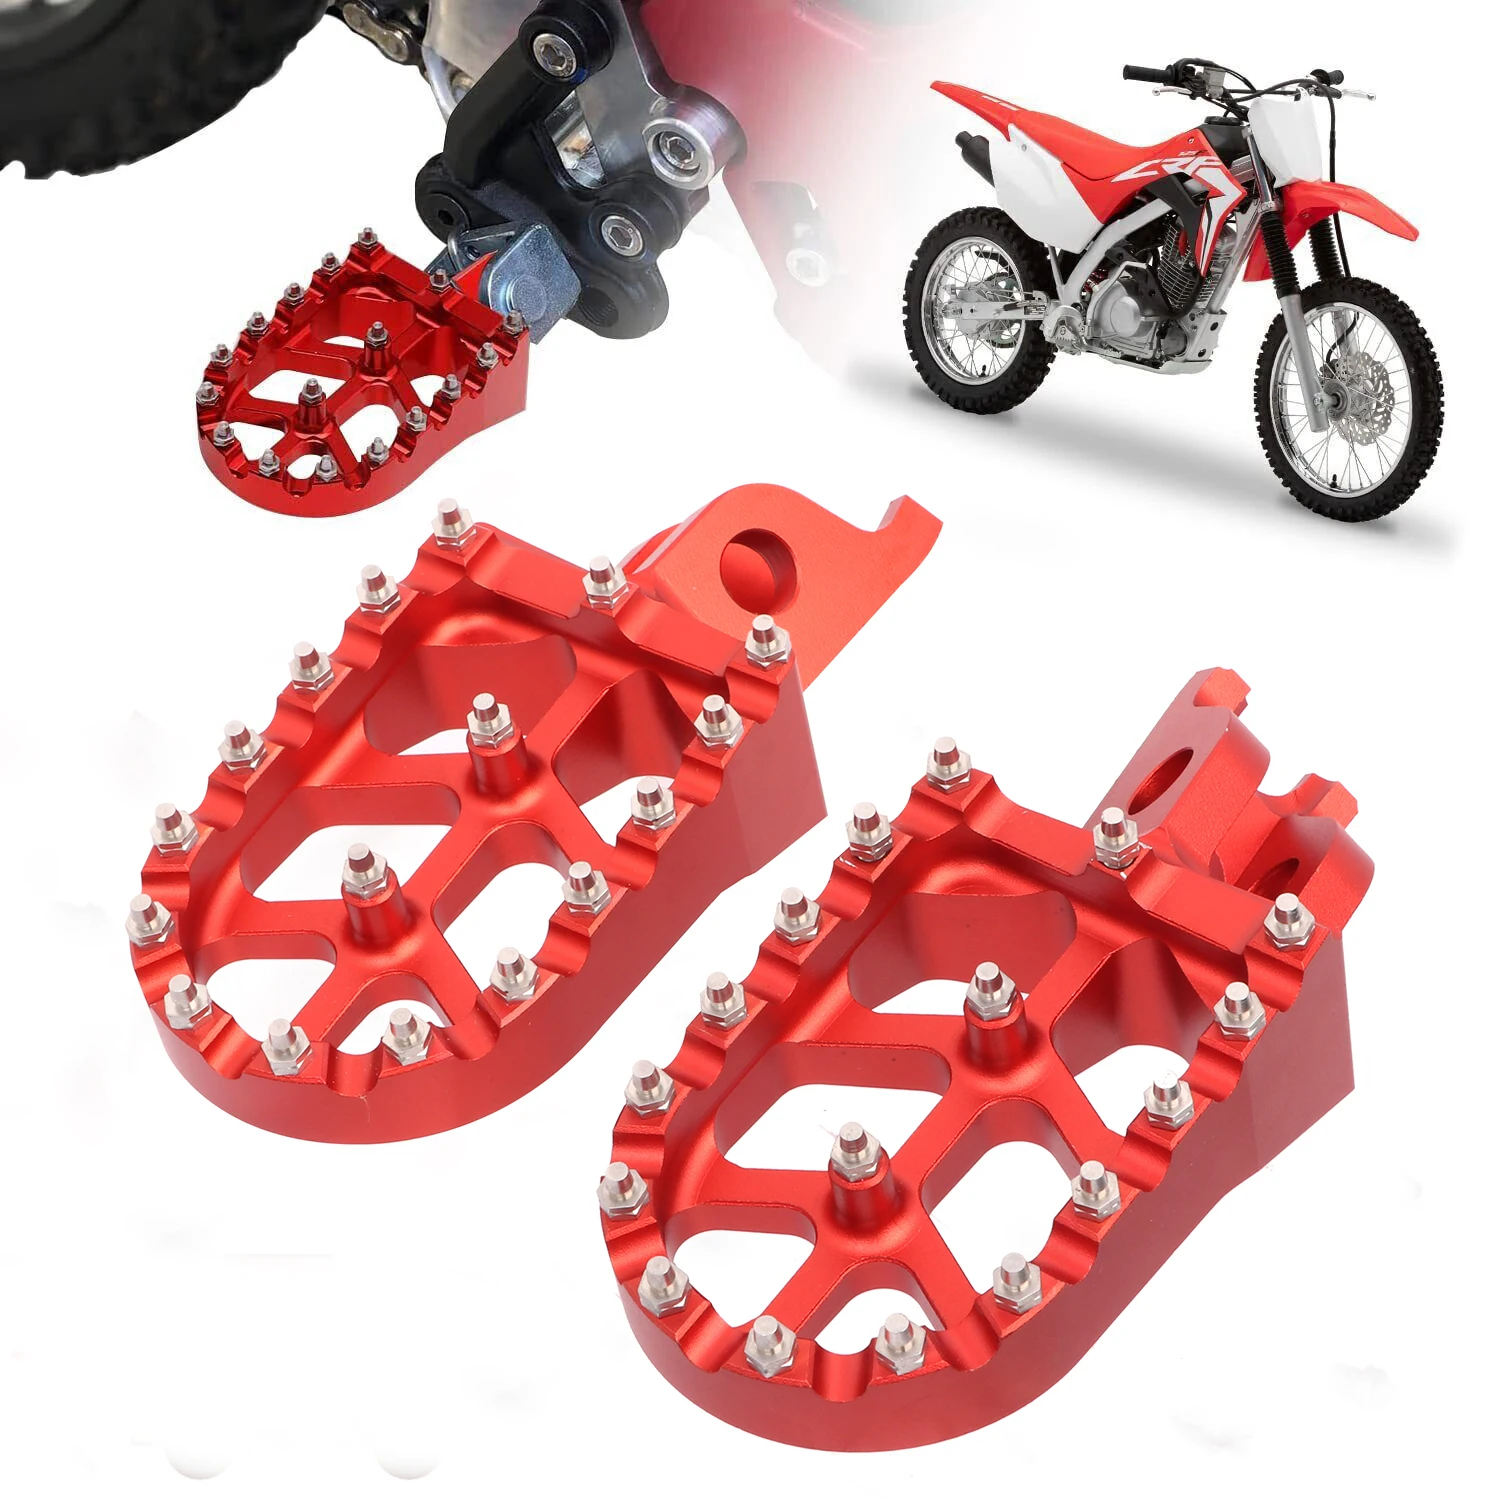 Motorcycle CNC FootRest Footpegs Foot Pegs Pedals For HONDA CR125 CR250 ... - $23.00